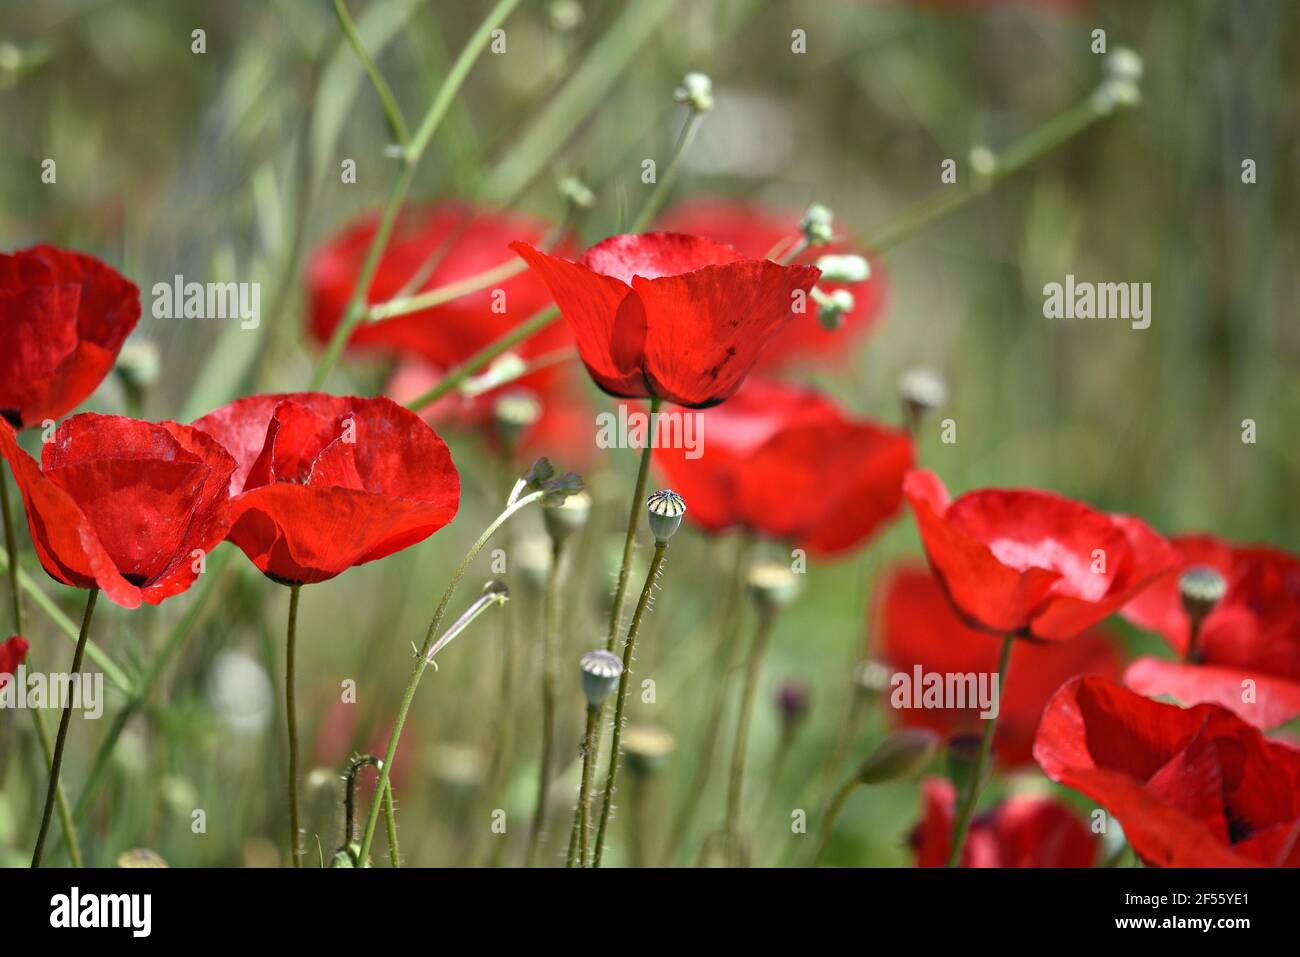 Papaver argemone a herbaceous flowering plant with scarlet flower petals on a natural springtime background. Stock Photo